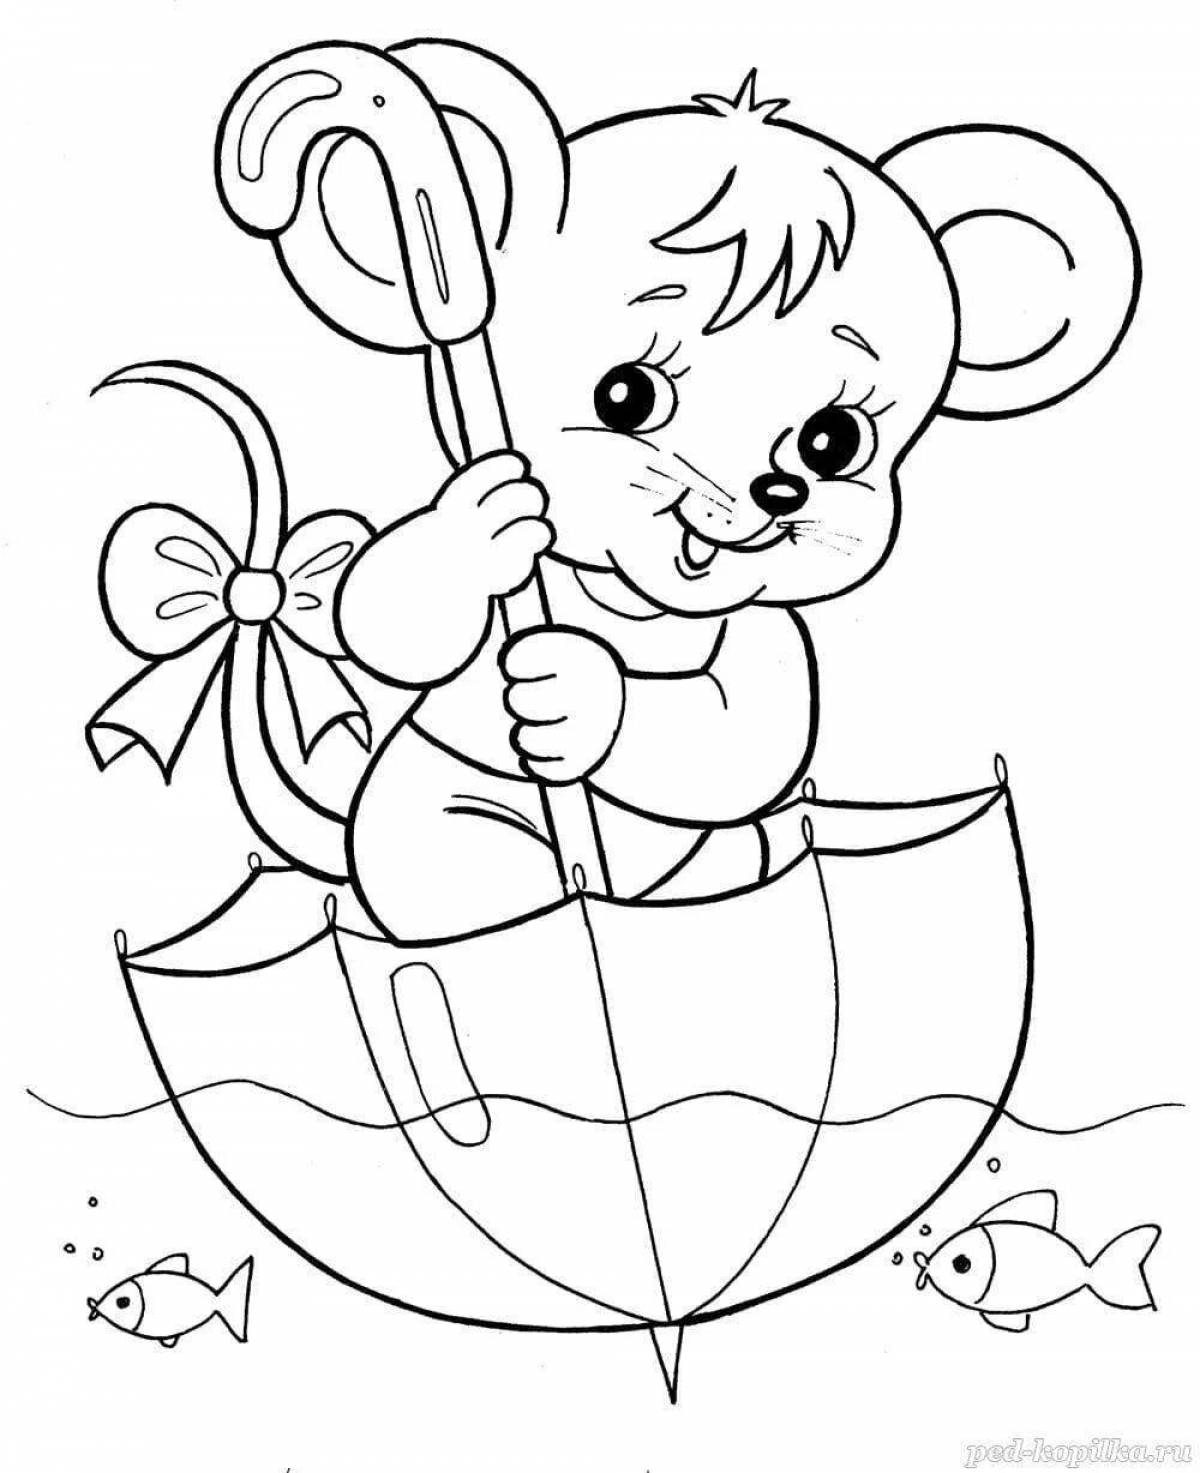 Coloring book for children 5